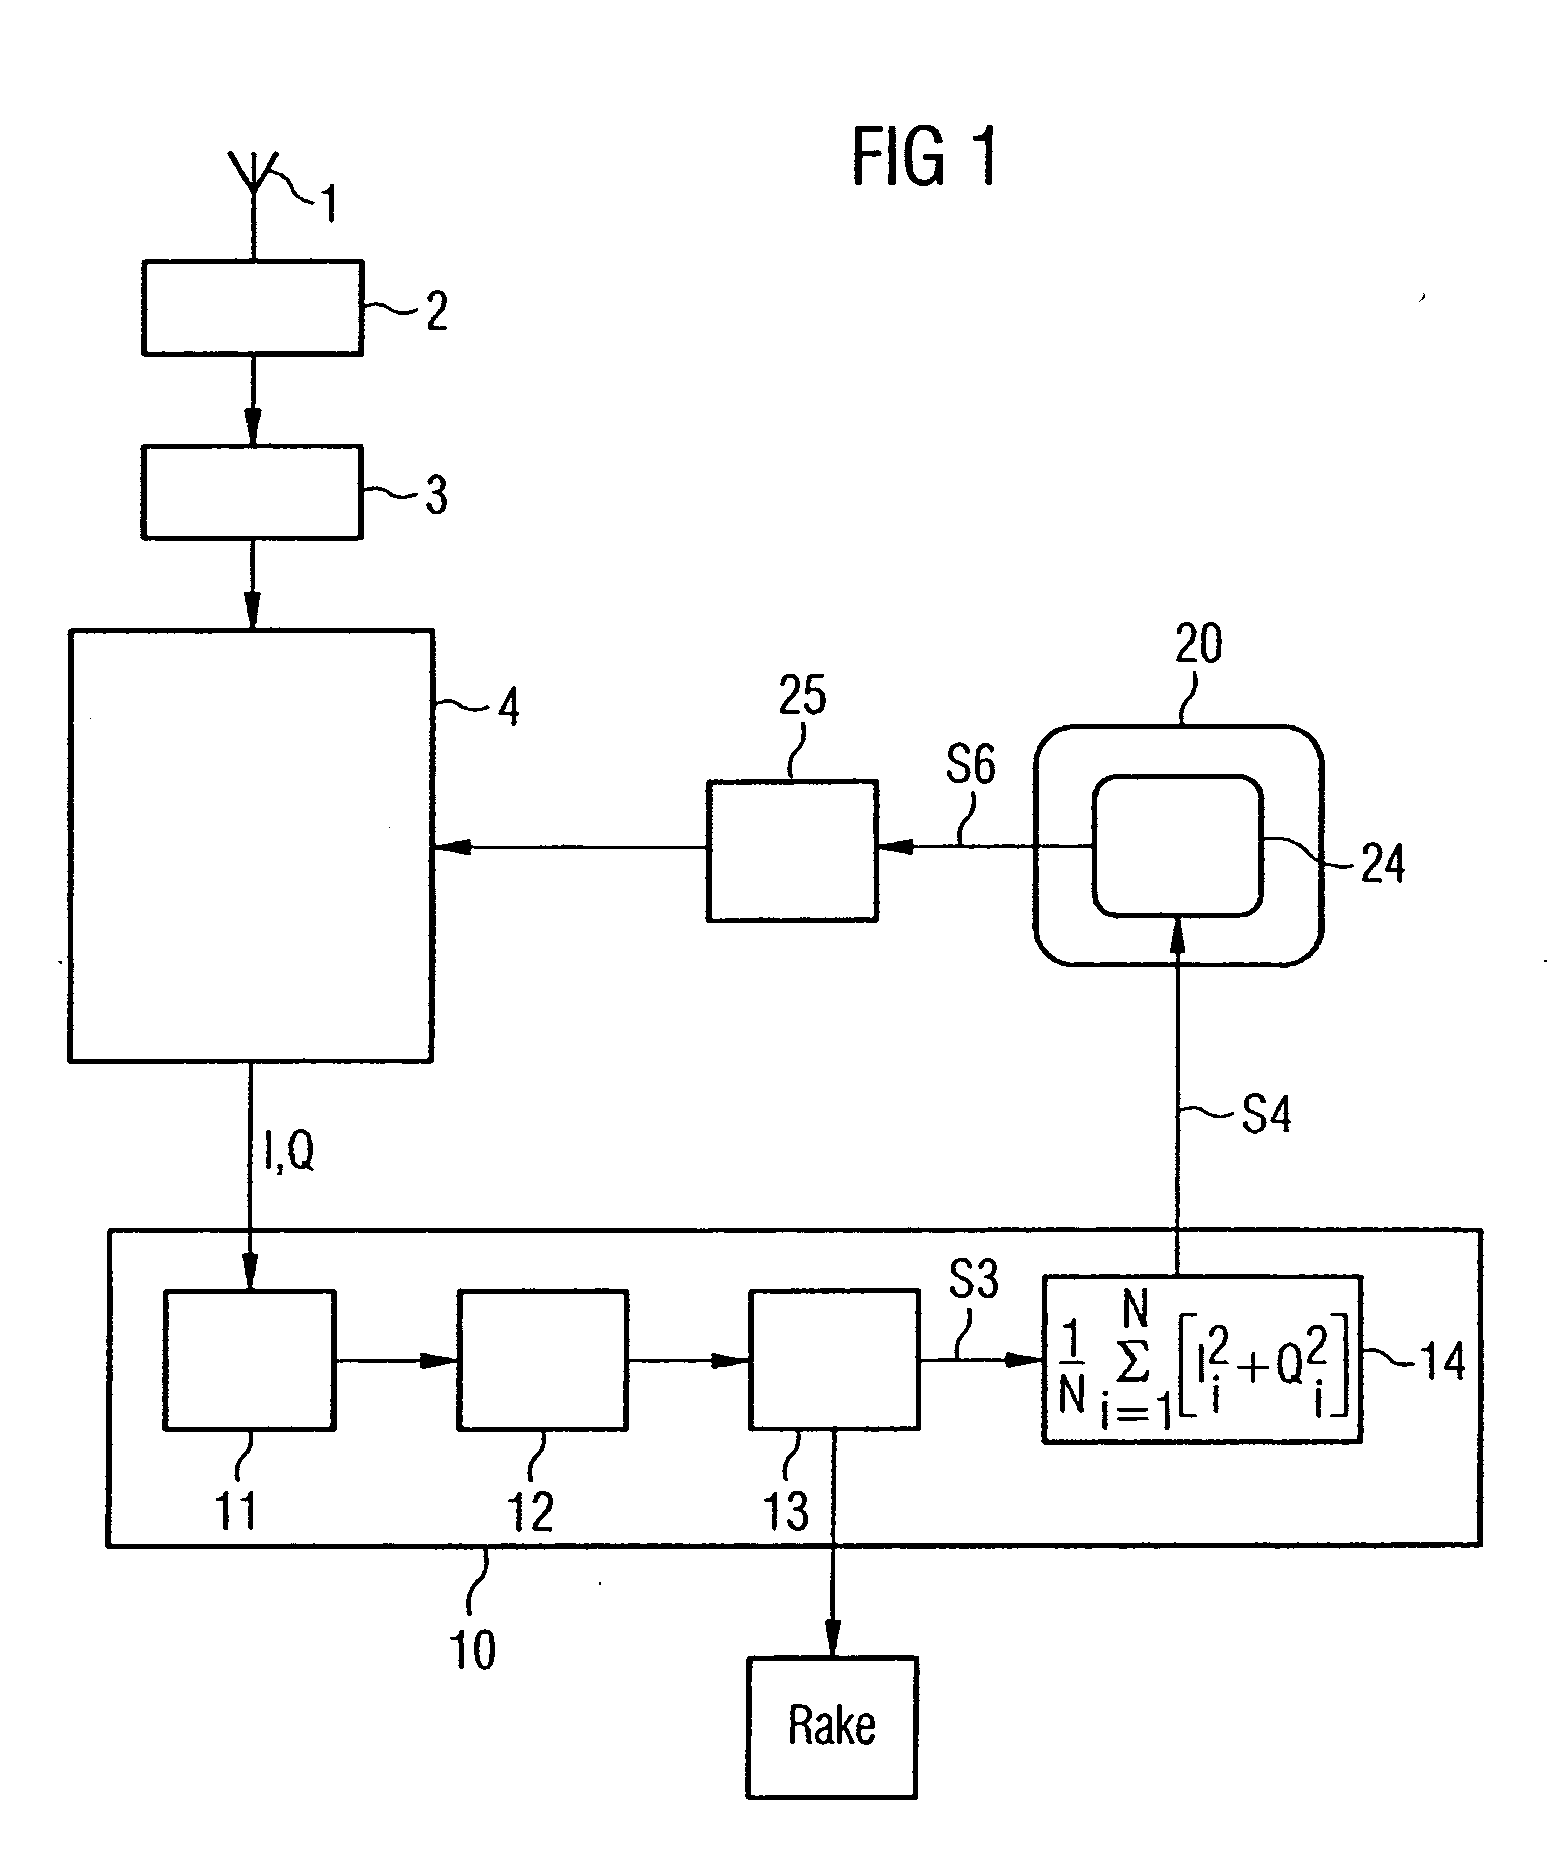 Control method for the AGC unit of a radio receiver